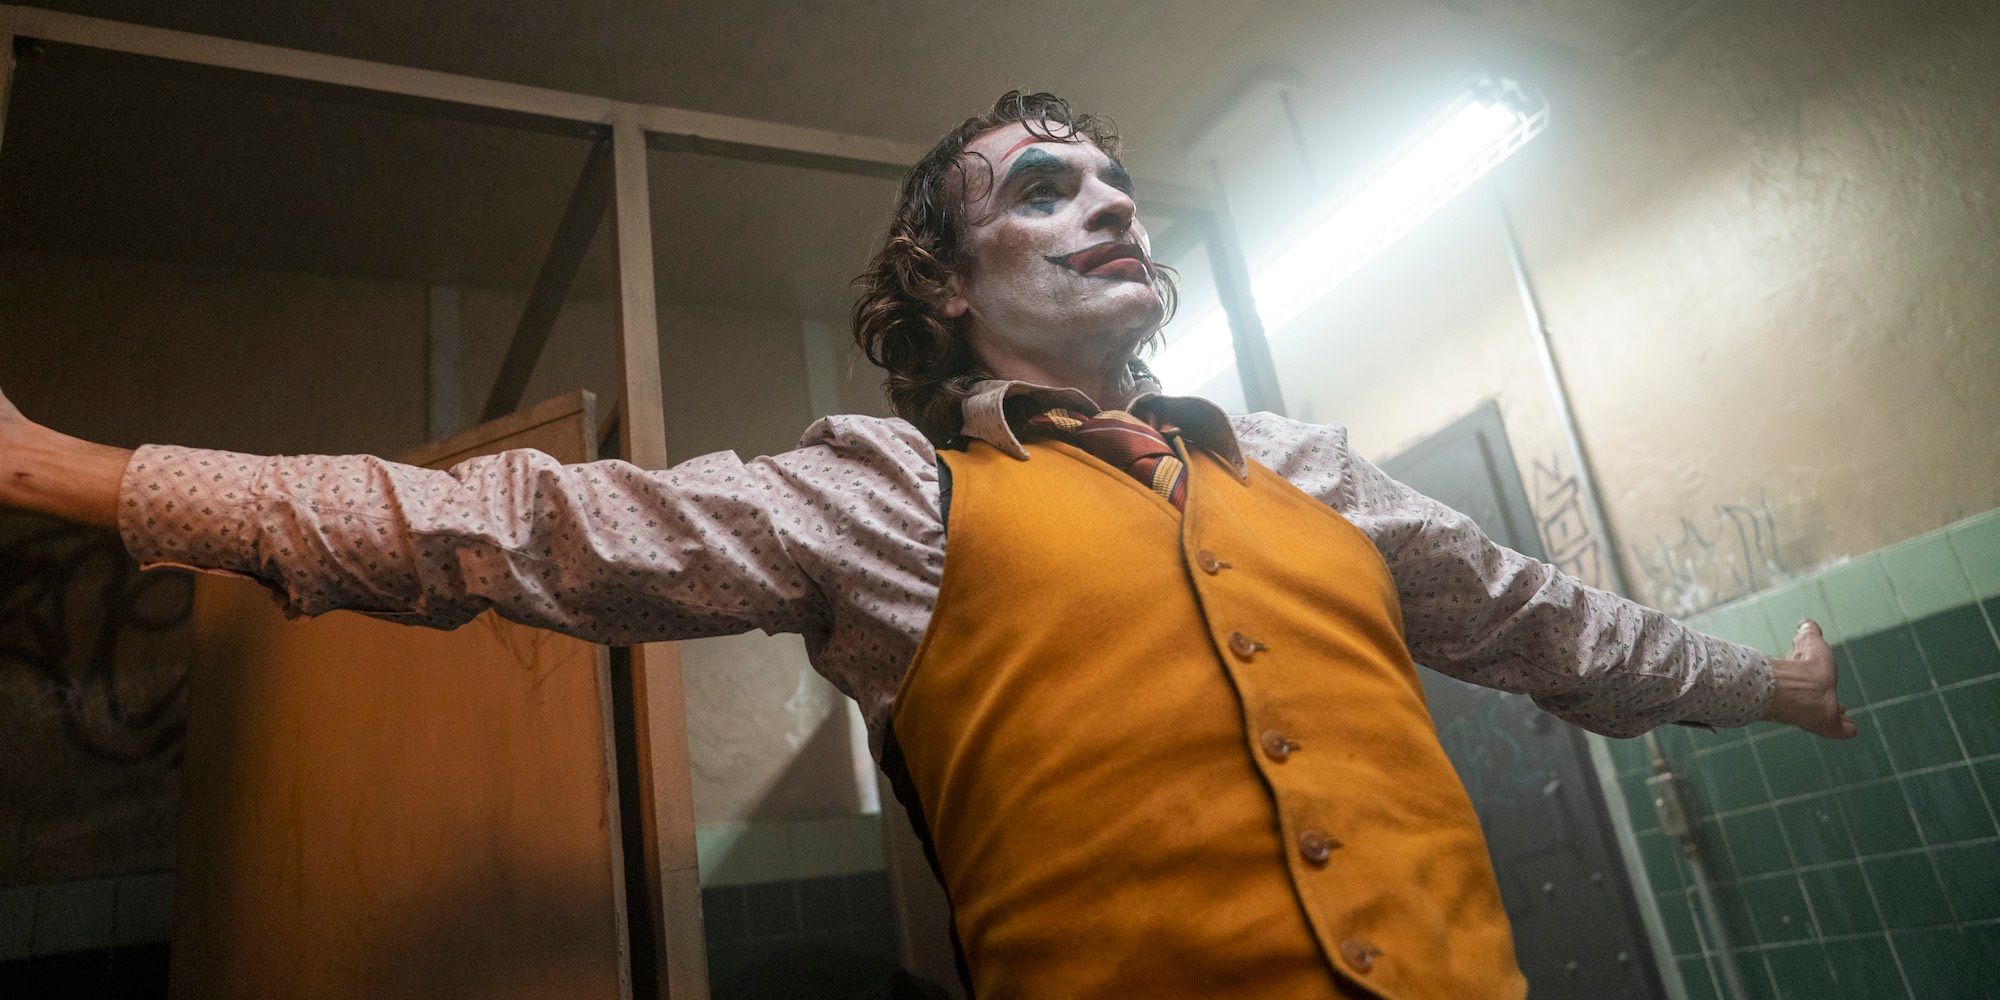 Joaquin Phoenix as Joker with his arms spread wide